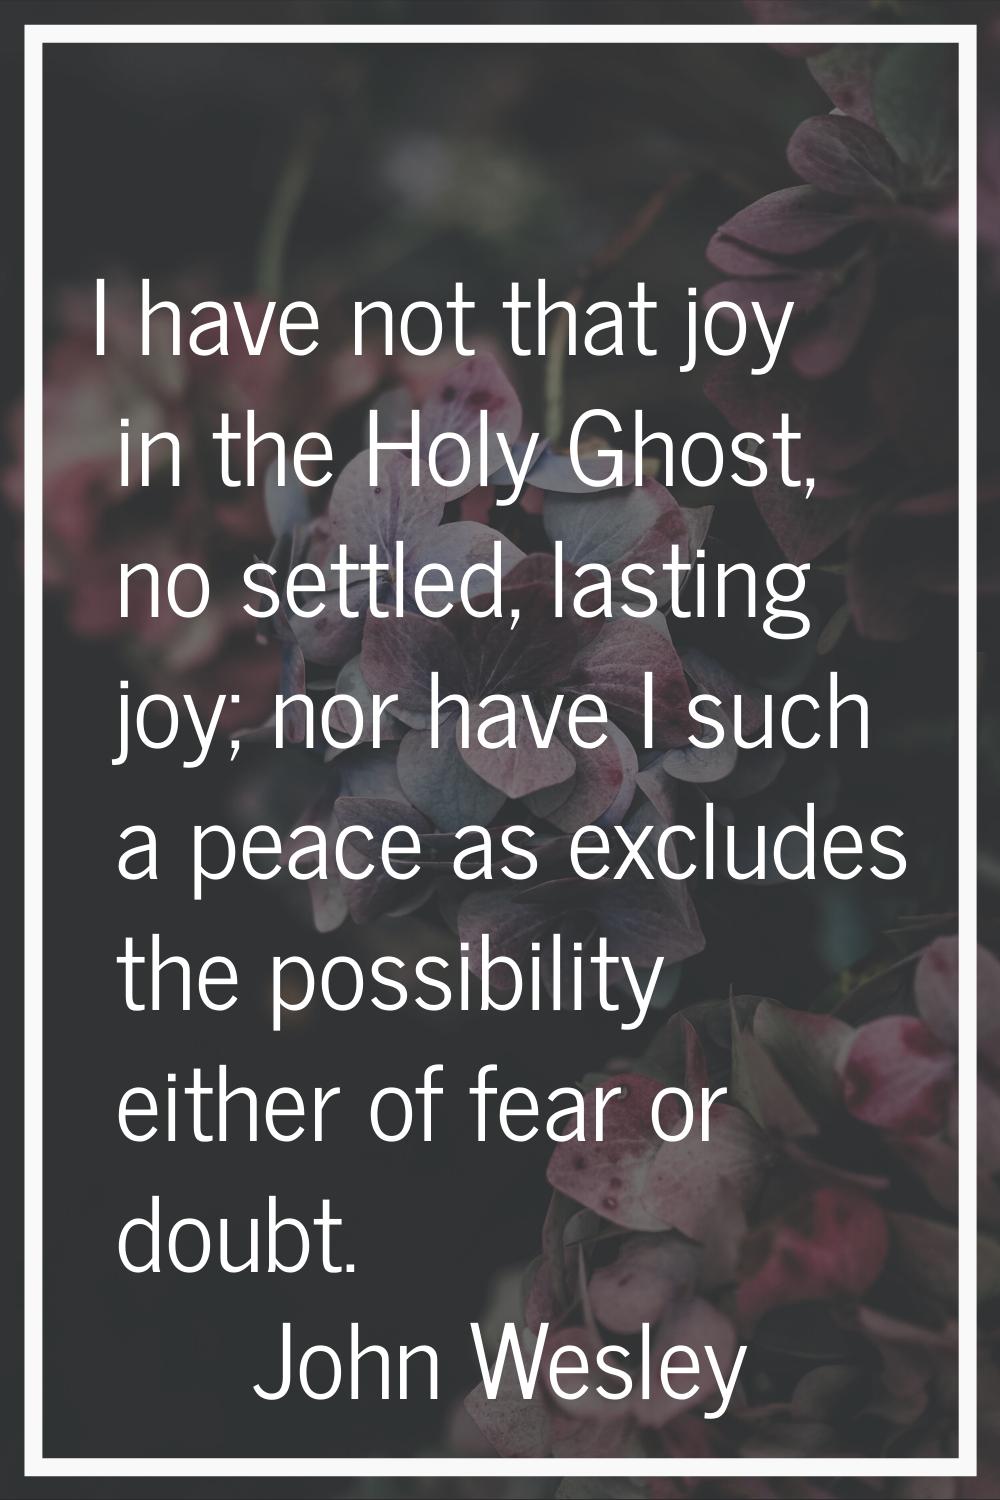 I have not that joy in the Holy Ghost, no settled, lasting joy; nor have I such a peace as excludes